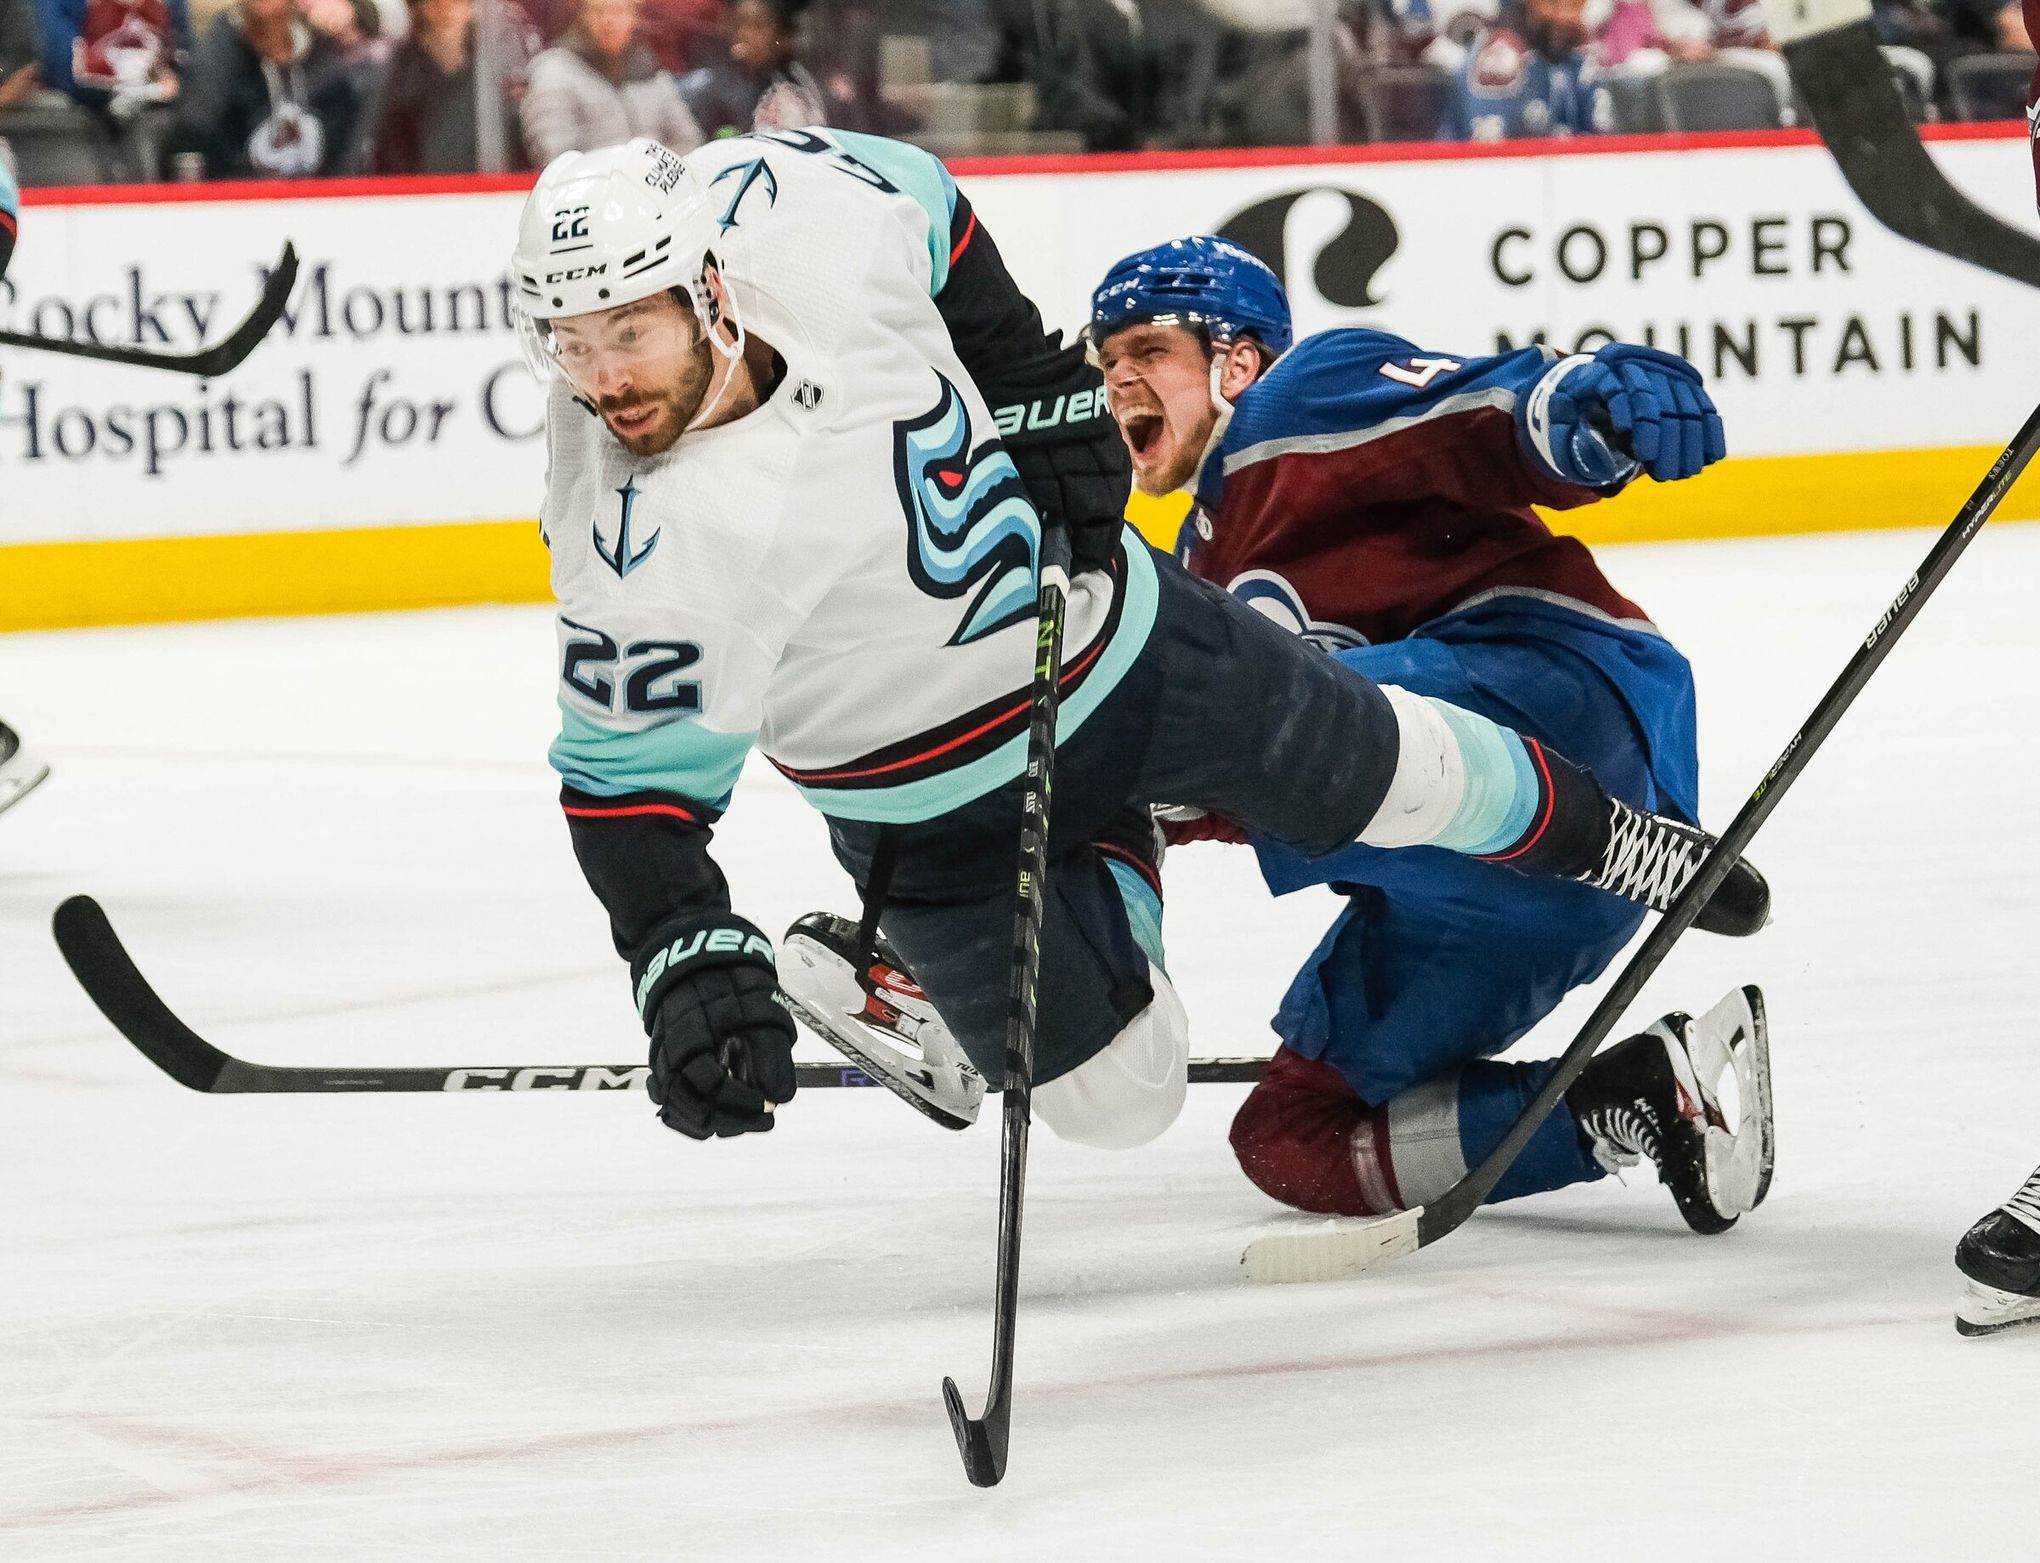 Thursday night's victory is why the NHL should fear the Colorado Avalanche